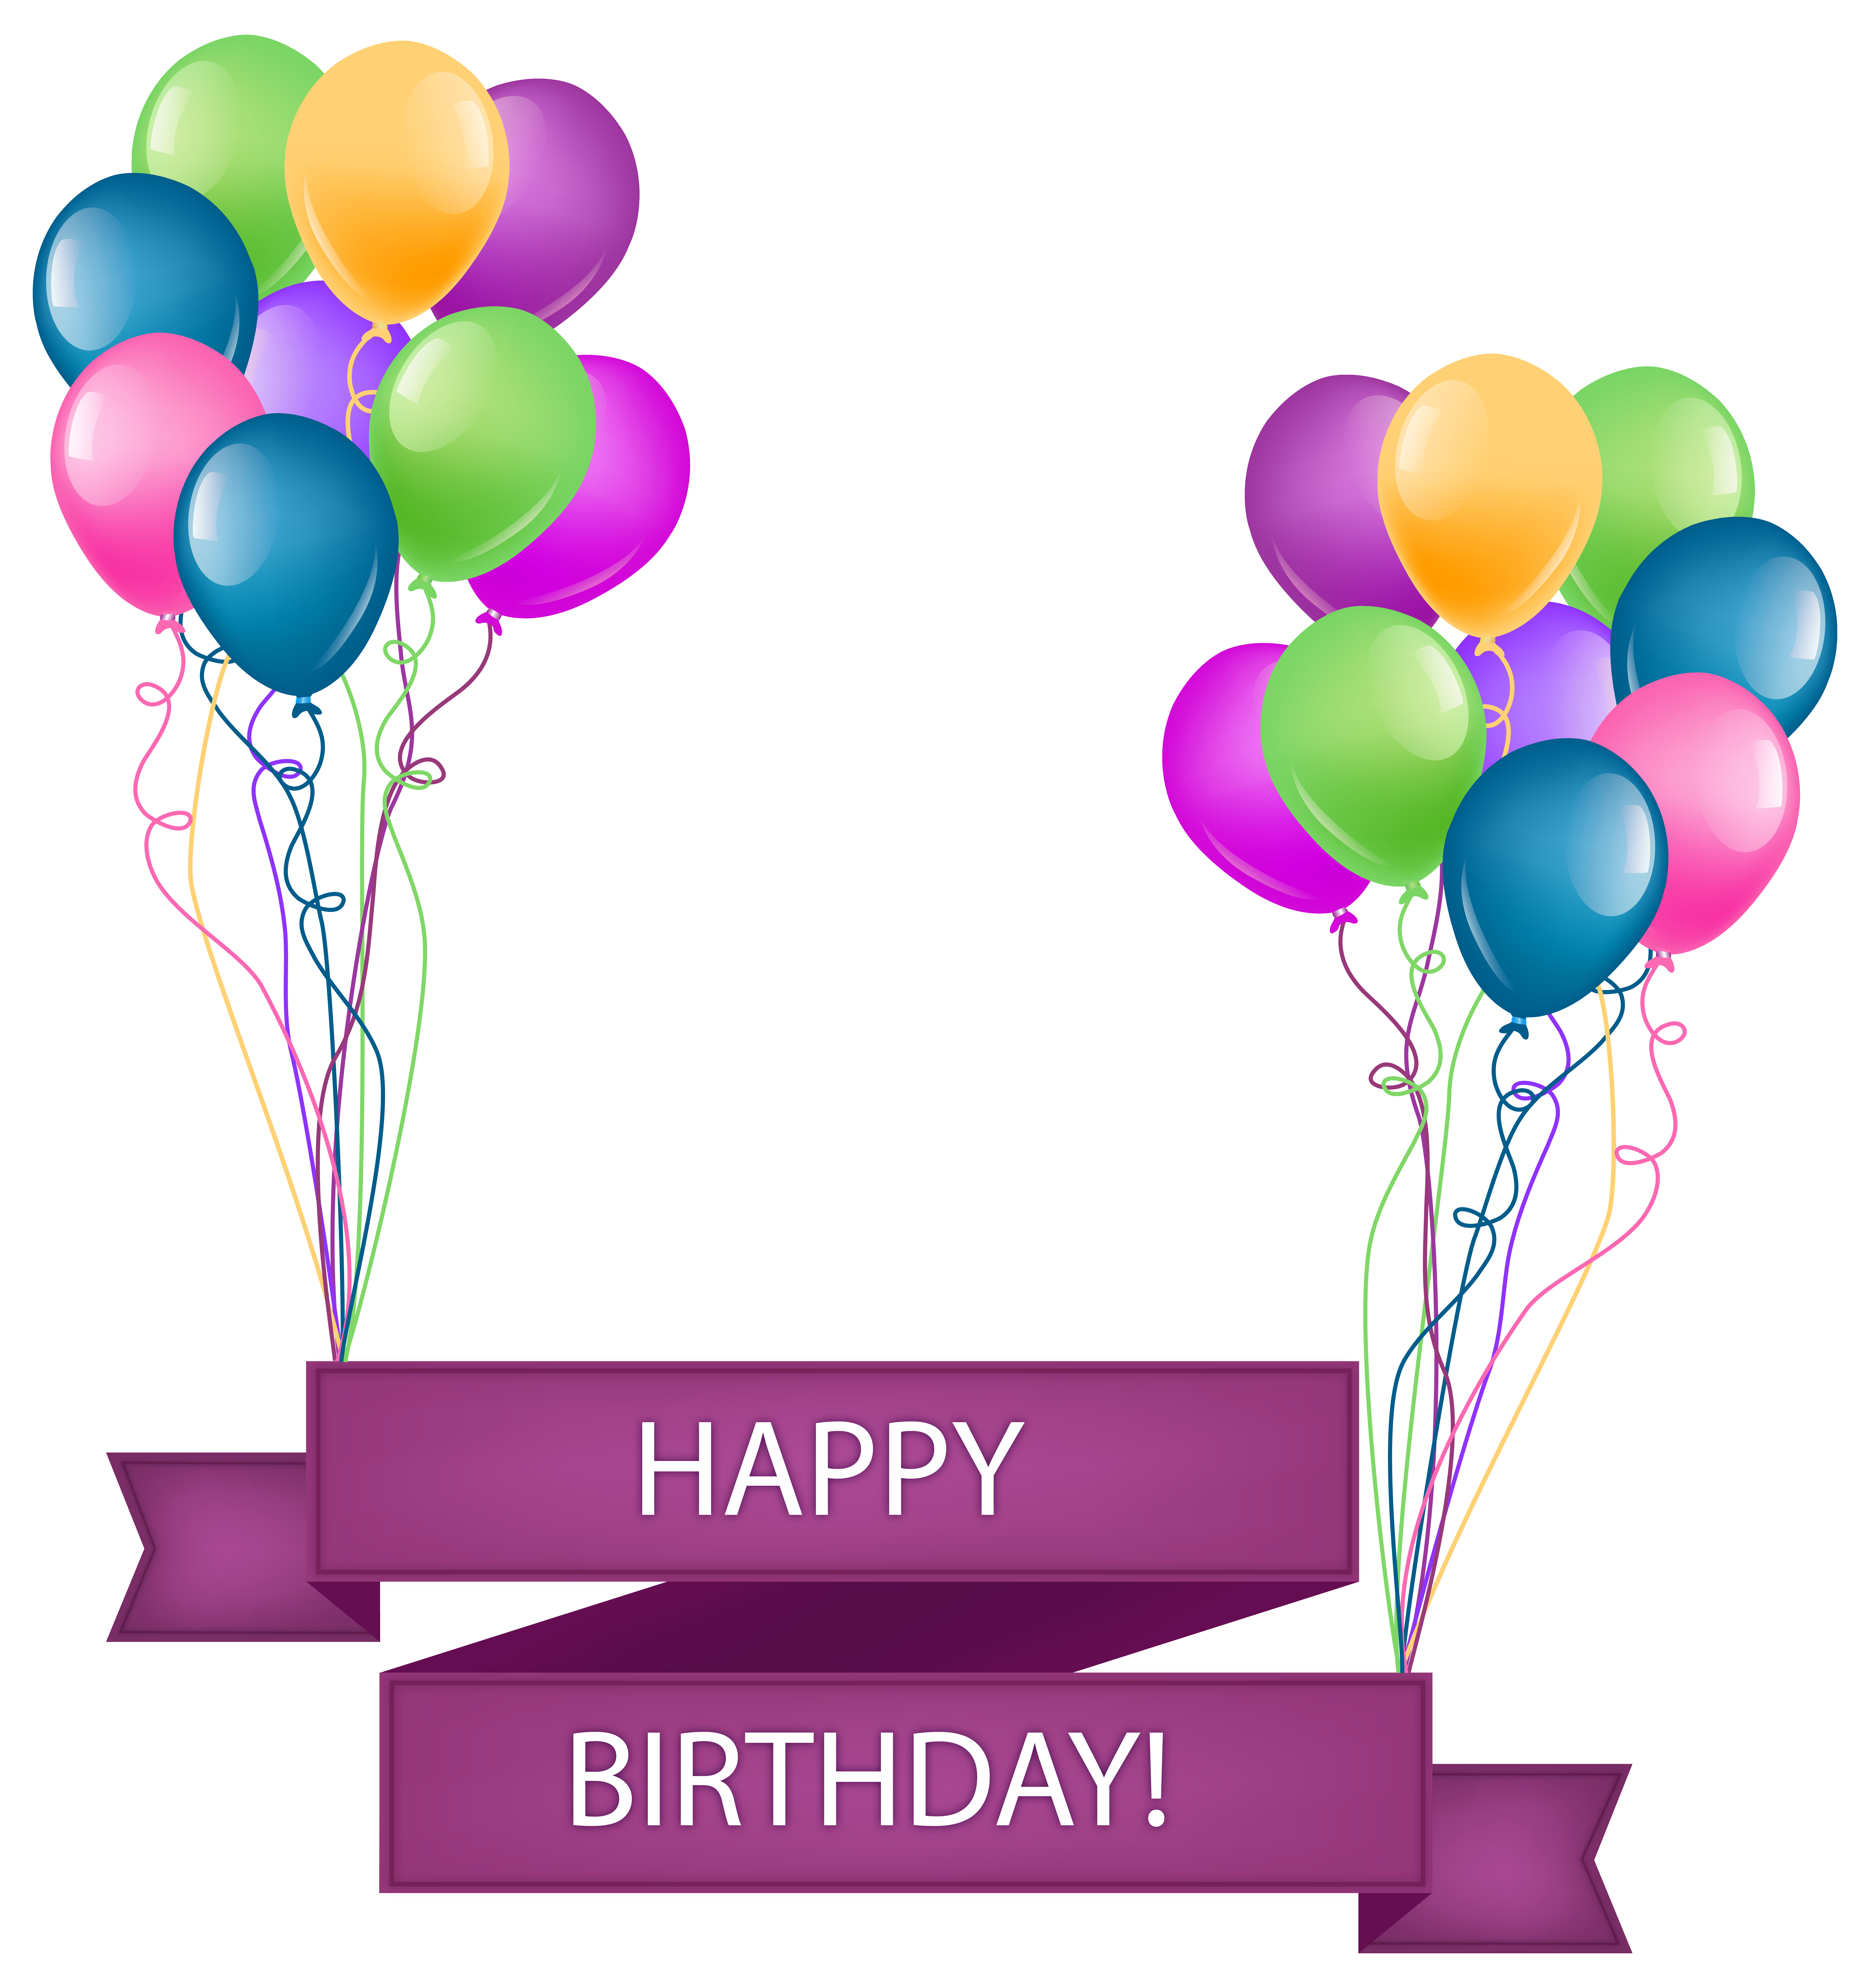 Happy Birthday Party Pictures Png Transparent Background Free Download 45919 Freeiconspng